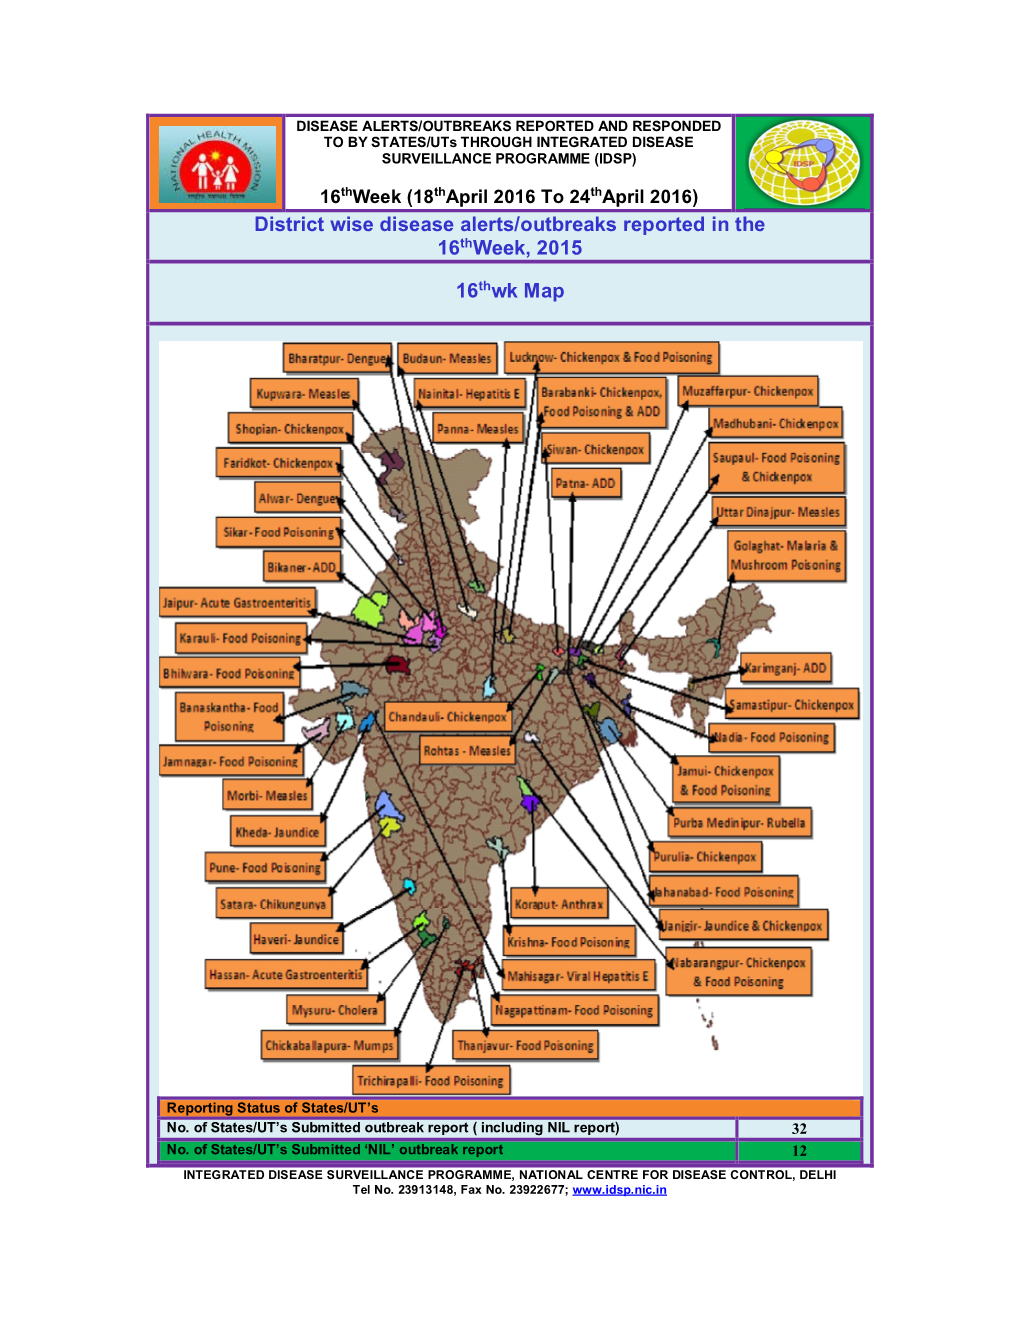 District Wise Disease Alerts/Outbreaks Reported in the 16Thweek, 2015